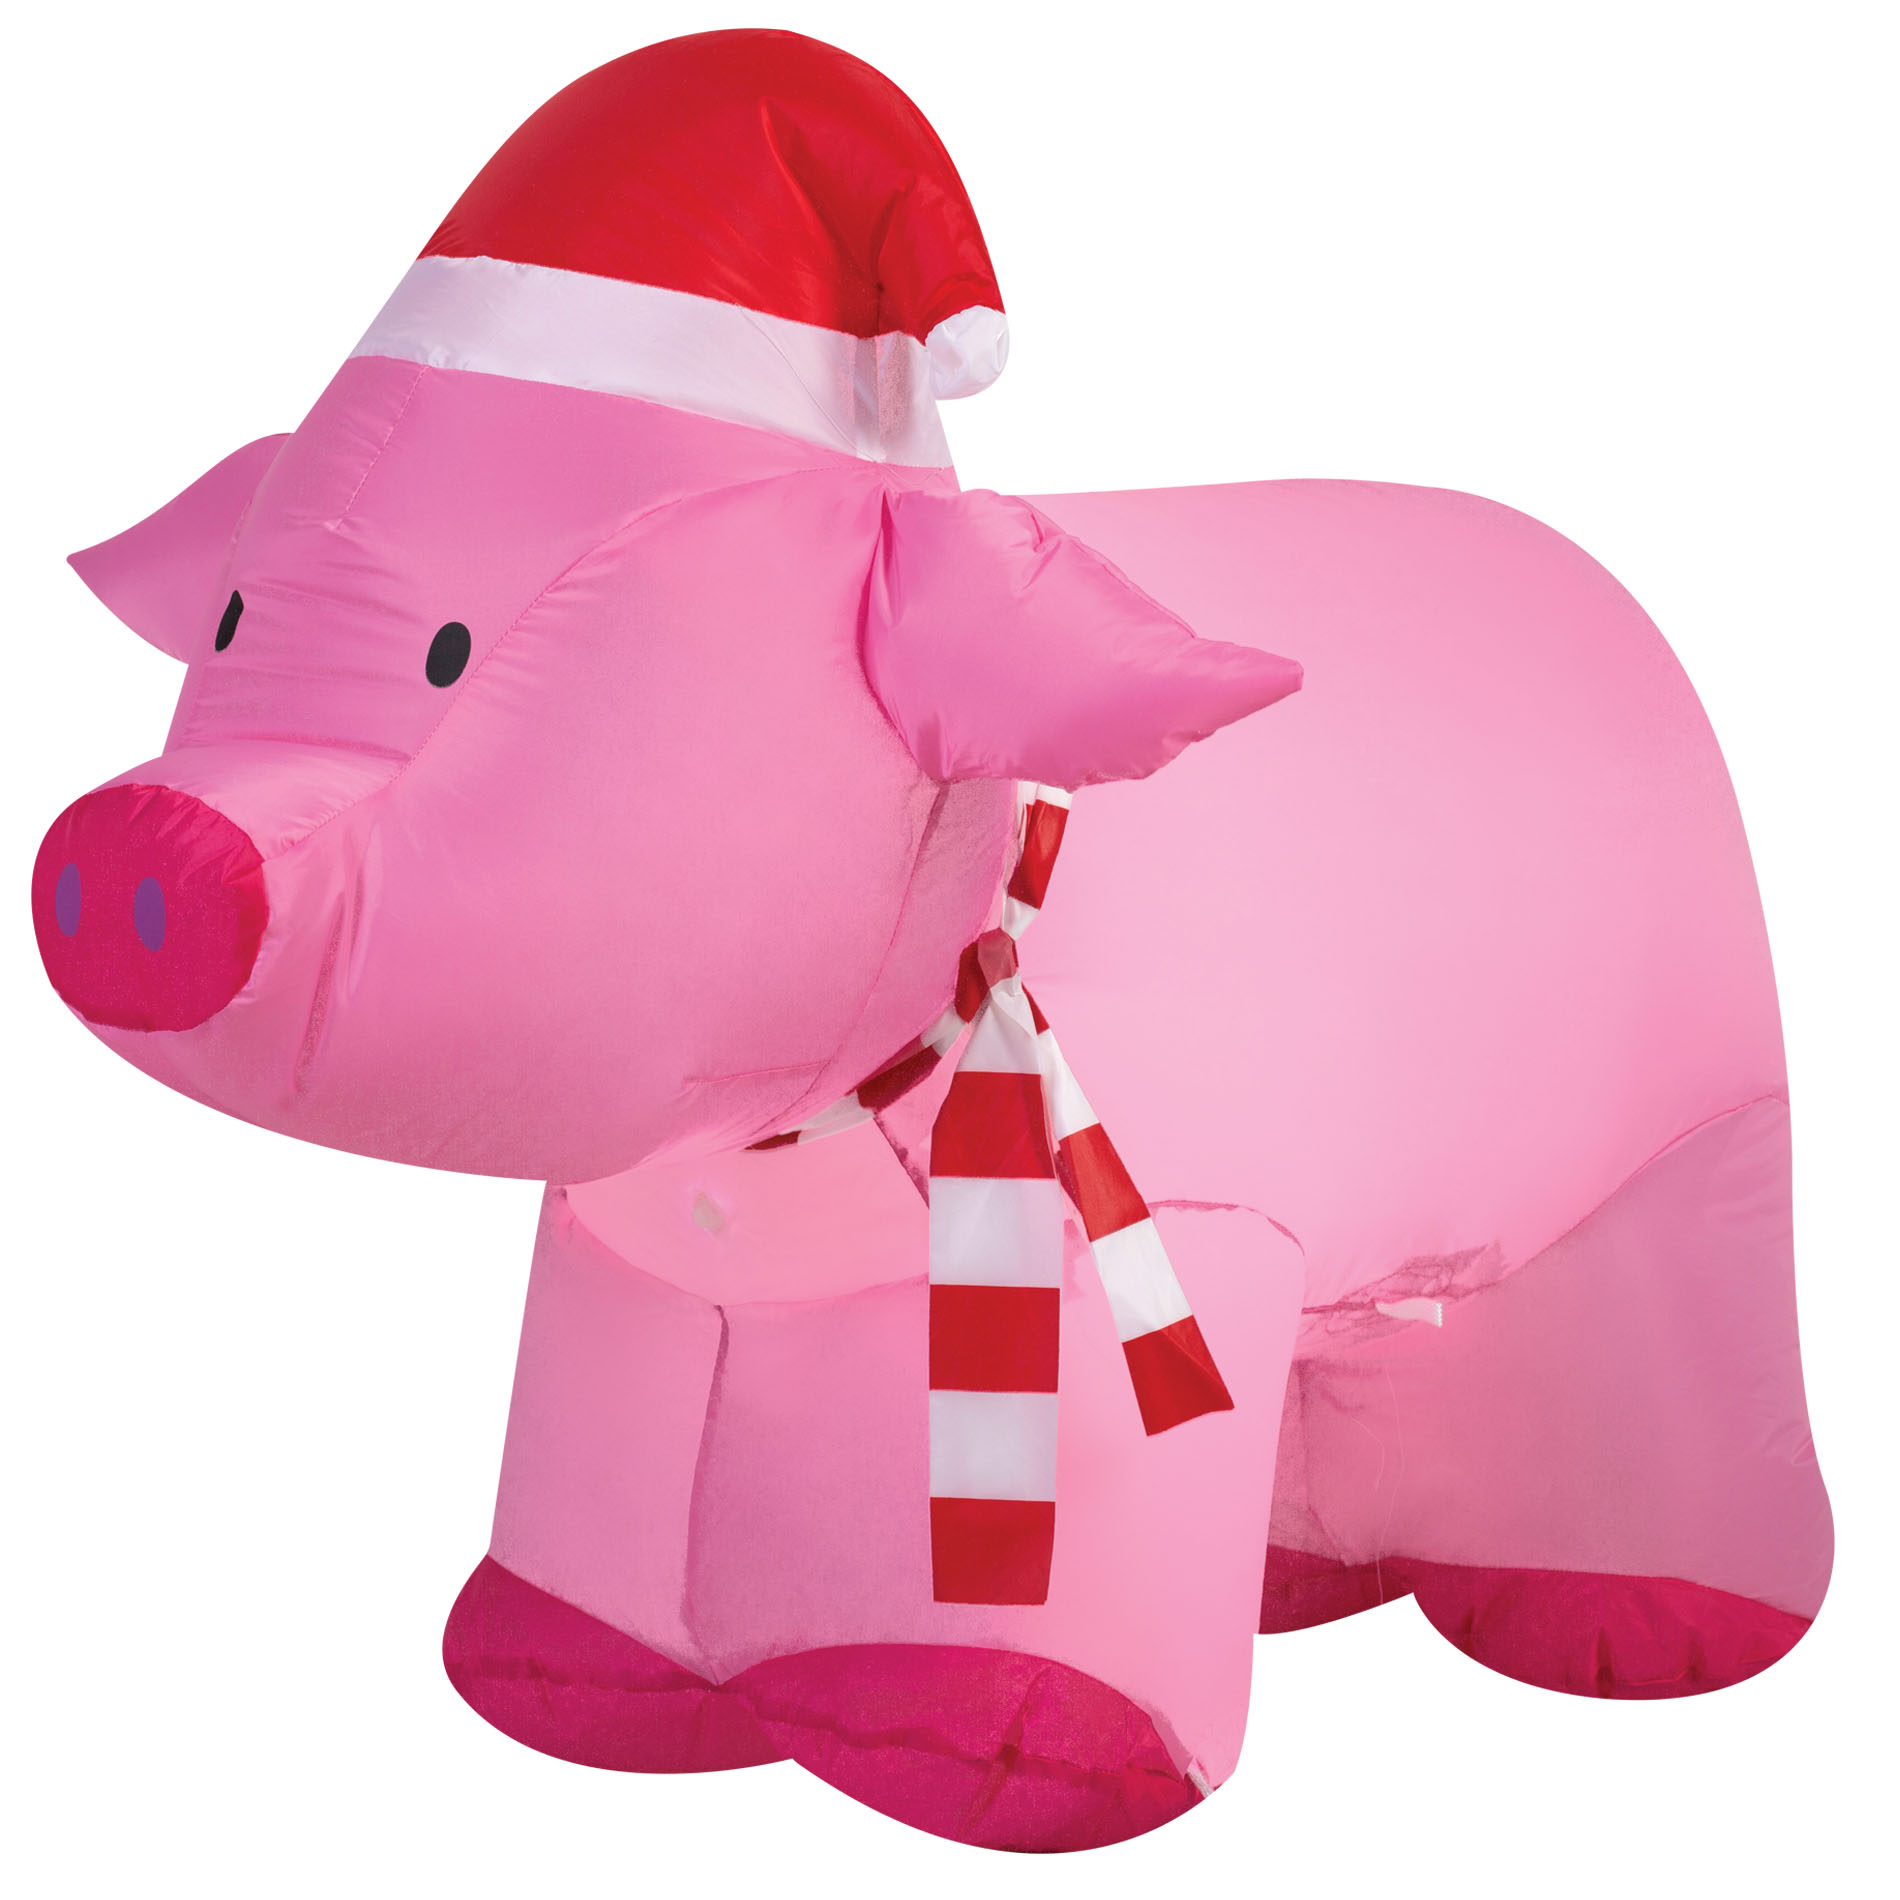 3' Airblown Lighted Inflatable Outdoor Pig